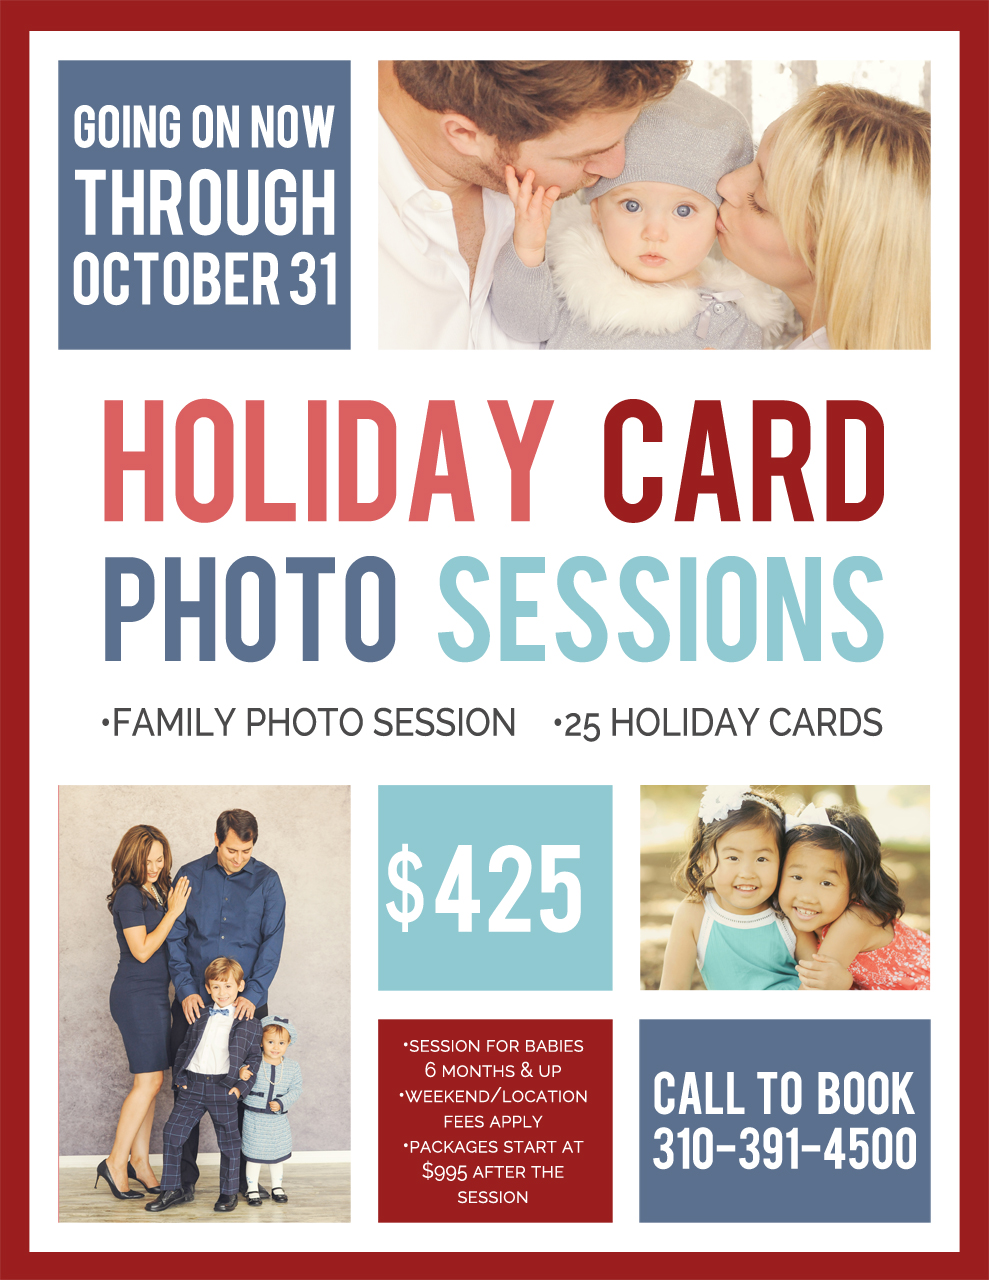 holiday-card-photo-sessions-med-res